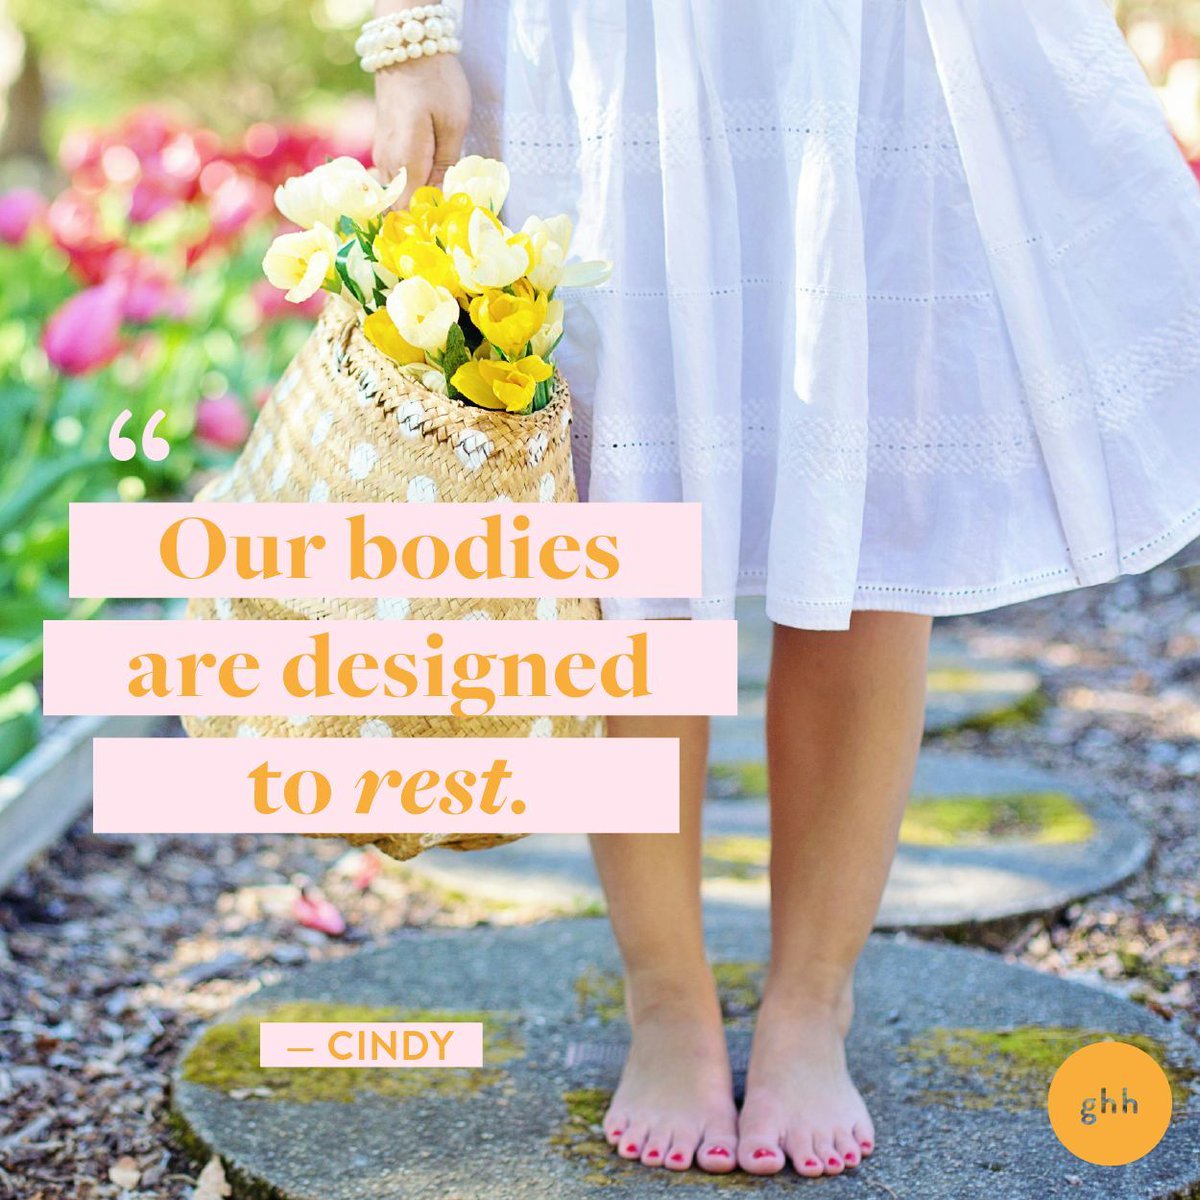 Rest is a gift—a good gift from our Creator who knows exactly what we need. - Cindy

#godhearsher
#dailydevo
#rest